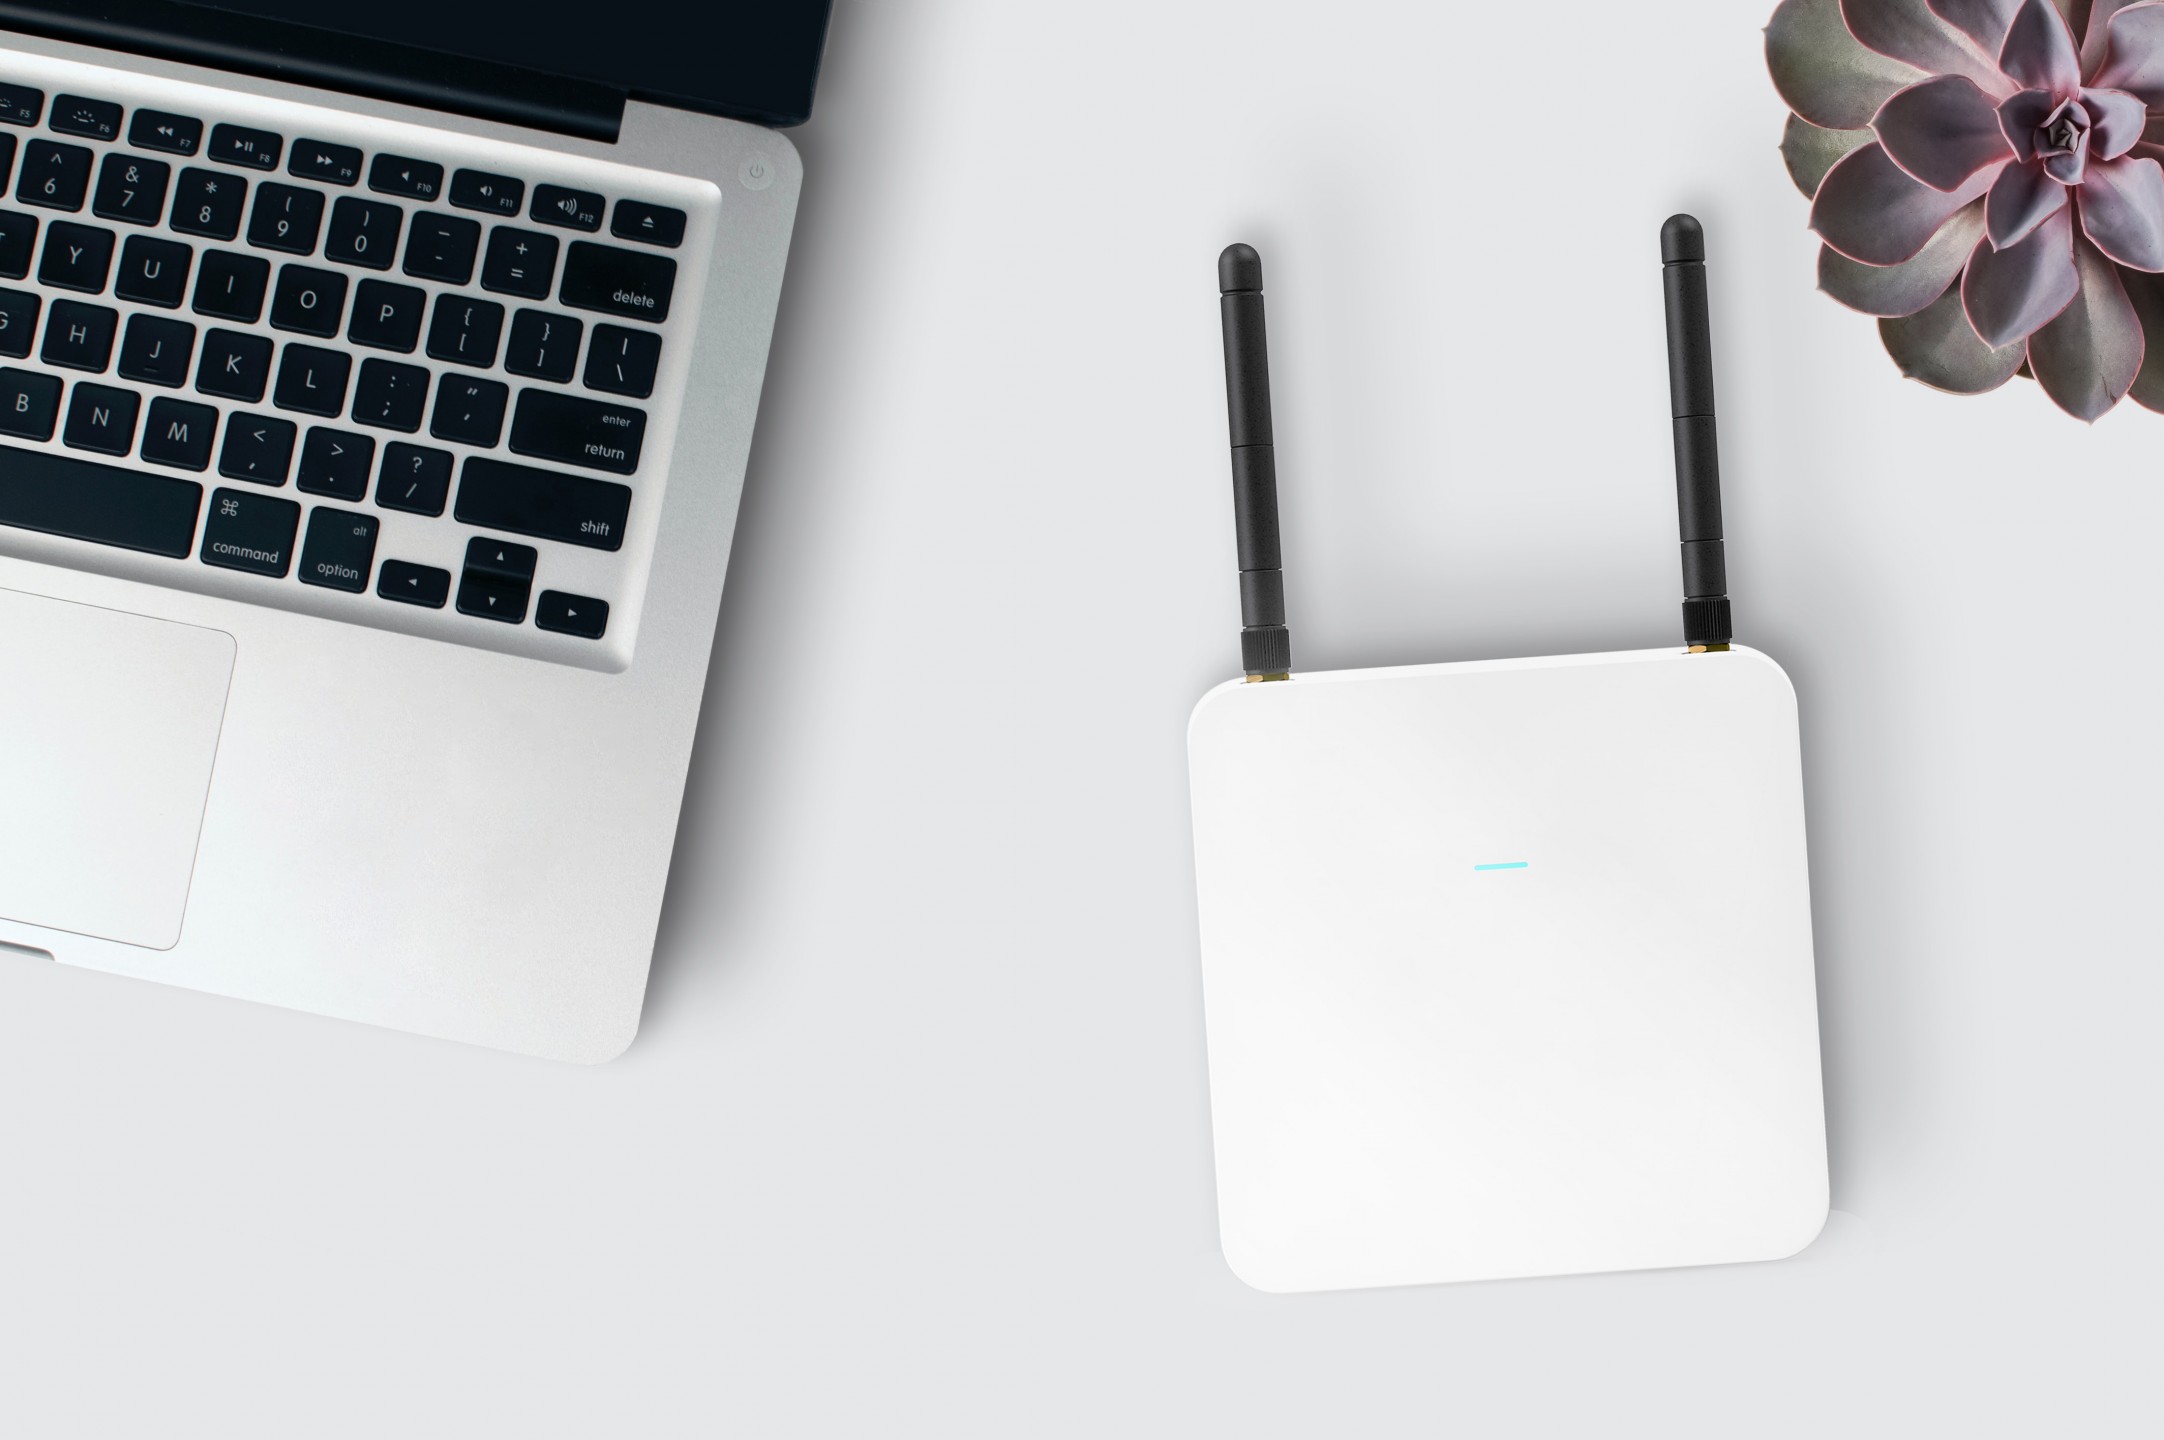 squarerooms inlytics laptop with wifi router white tabletop flatlay